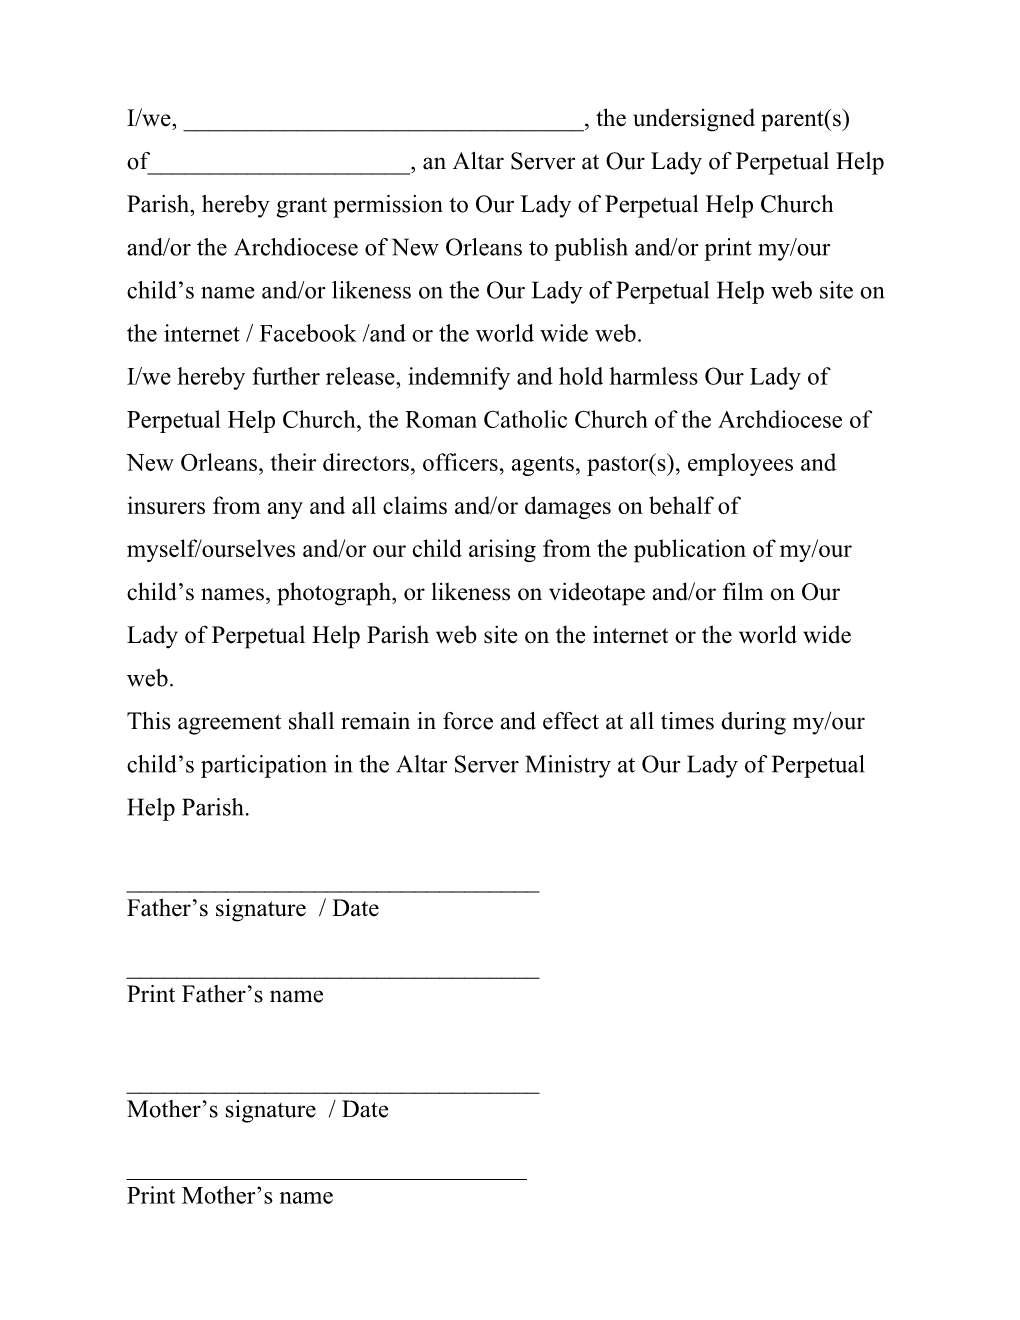 I/We, ______, the Undersigned Parent(S) Of______, an Altar Server at Our Lady of Perpetual